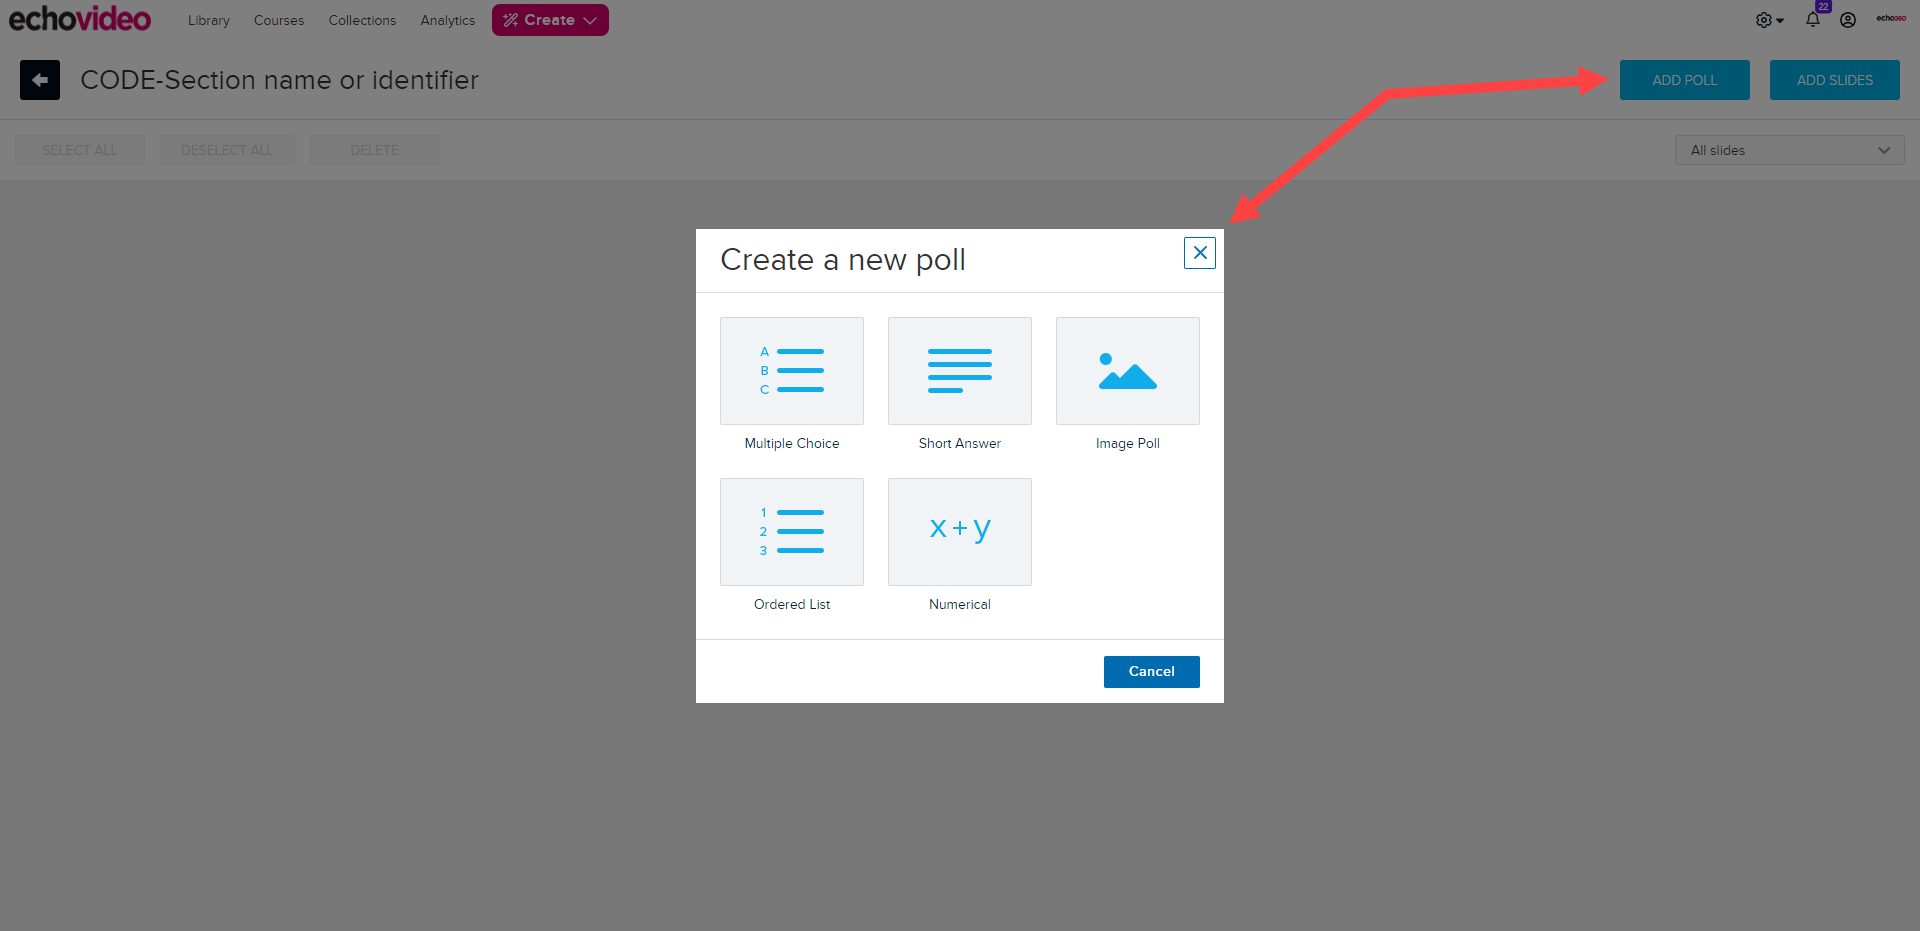 The Presentation Editor is shown with the Add Poll button identified and the create a new poll window with the five poll options and Cancel button displayed. Poll options are Multiple Choice, Short Answer, Image Poll, Ordered List, and Numerical